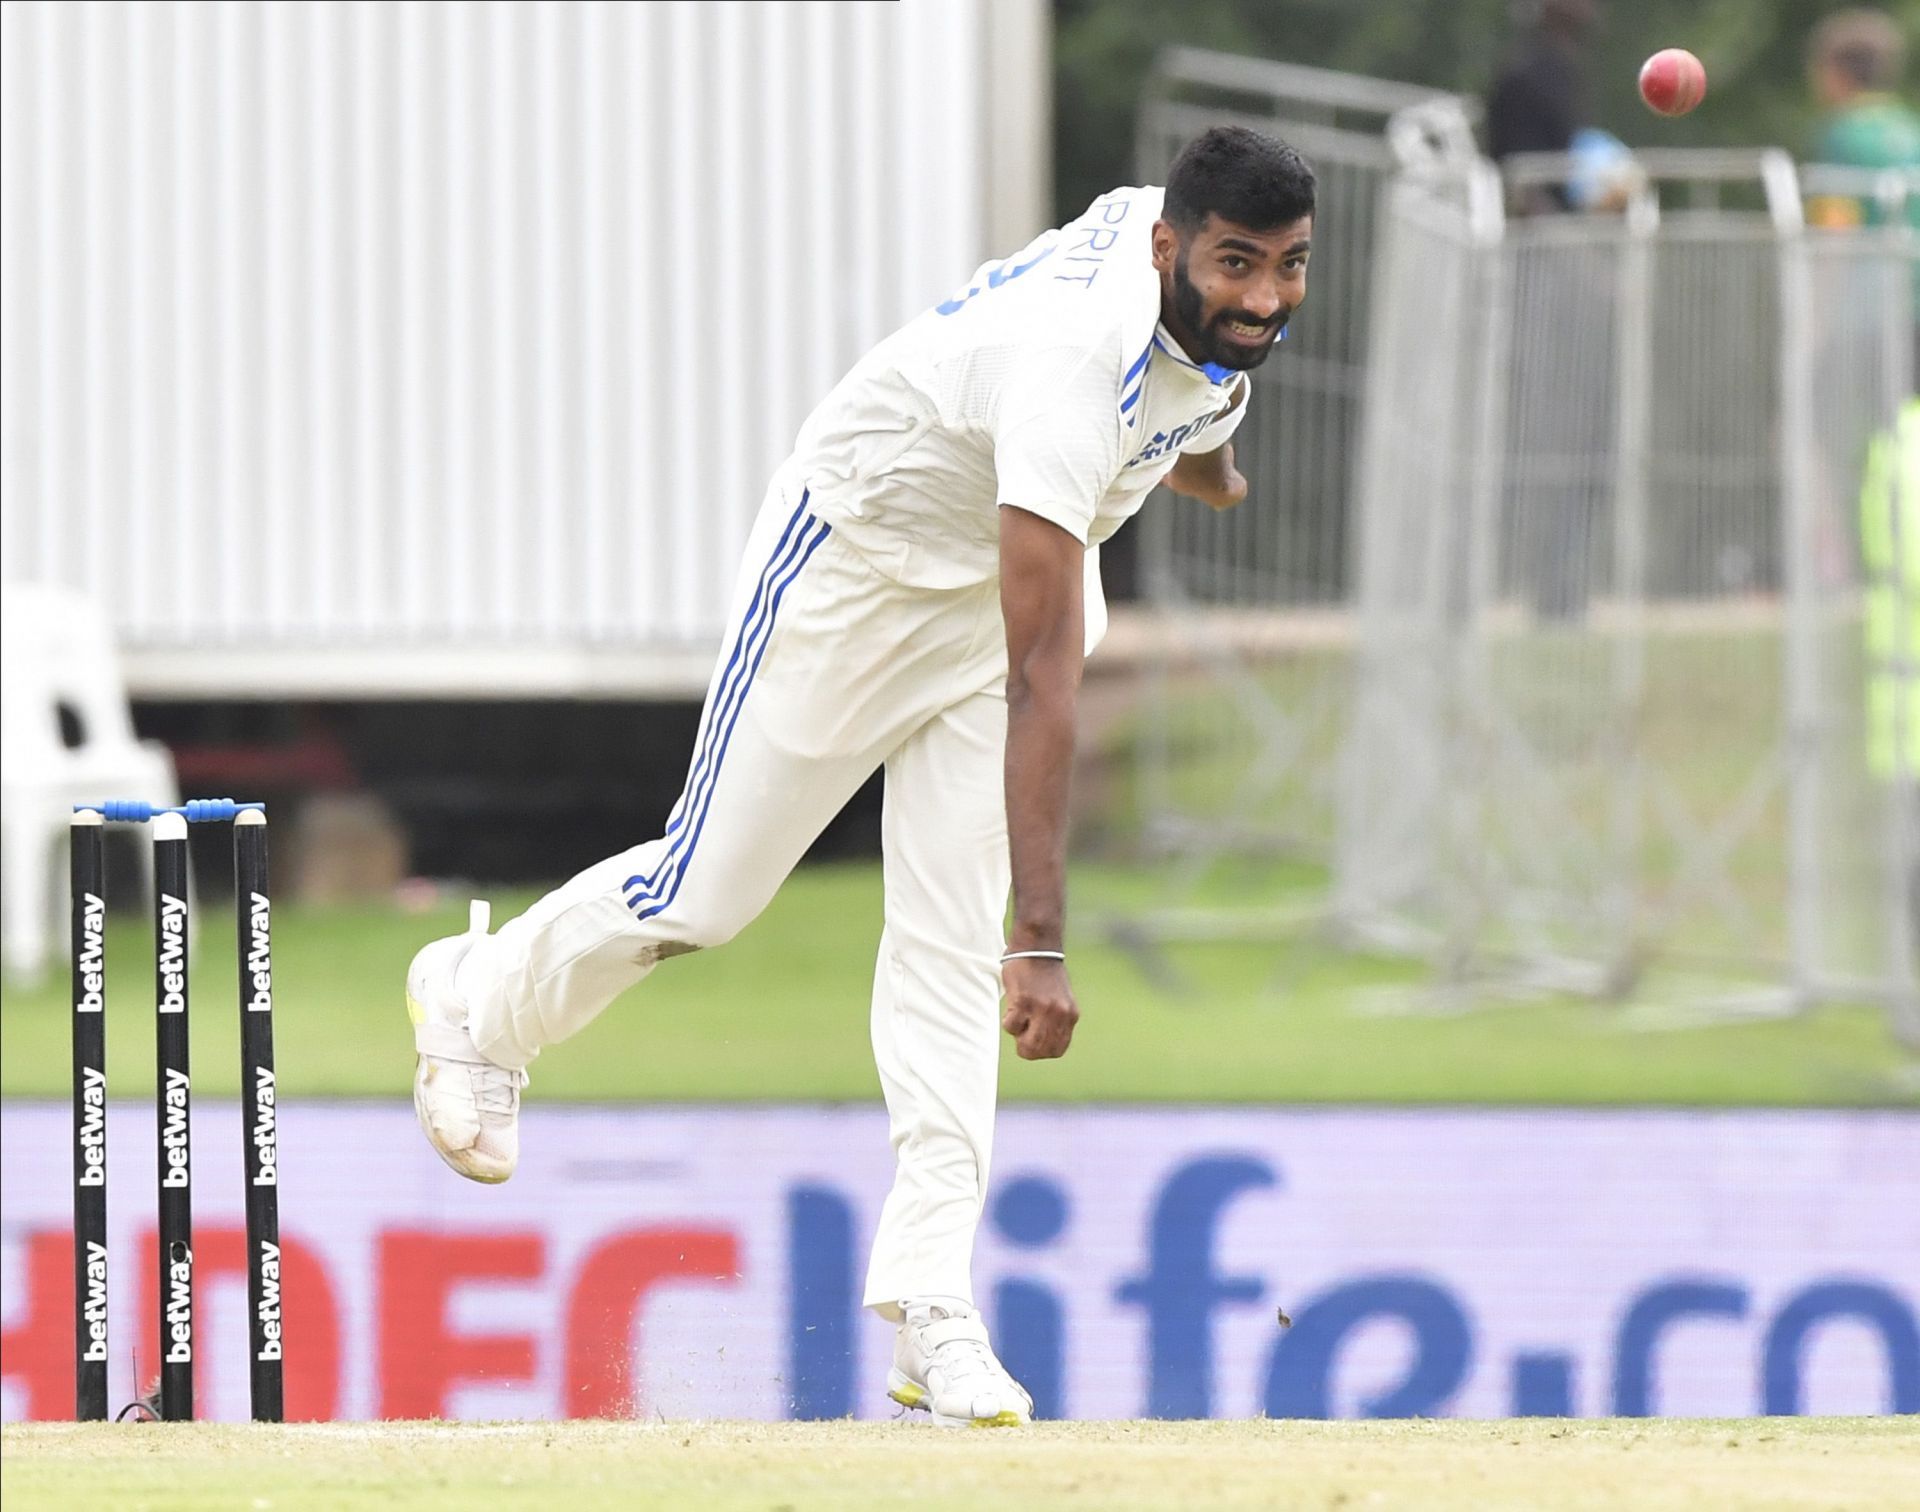 Jasprit Bumrah picked up six wickets in the second innings: South Africa v India - 1st Test